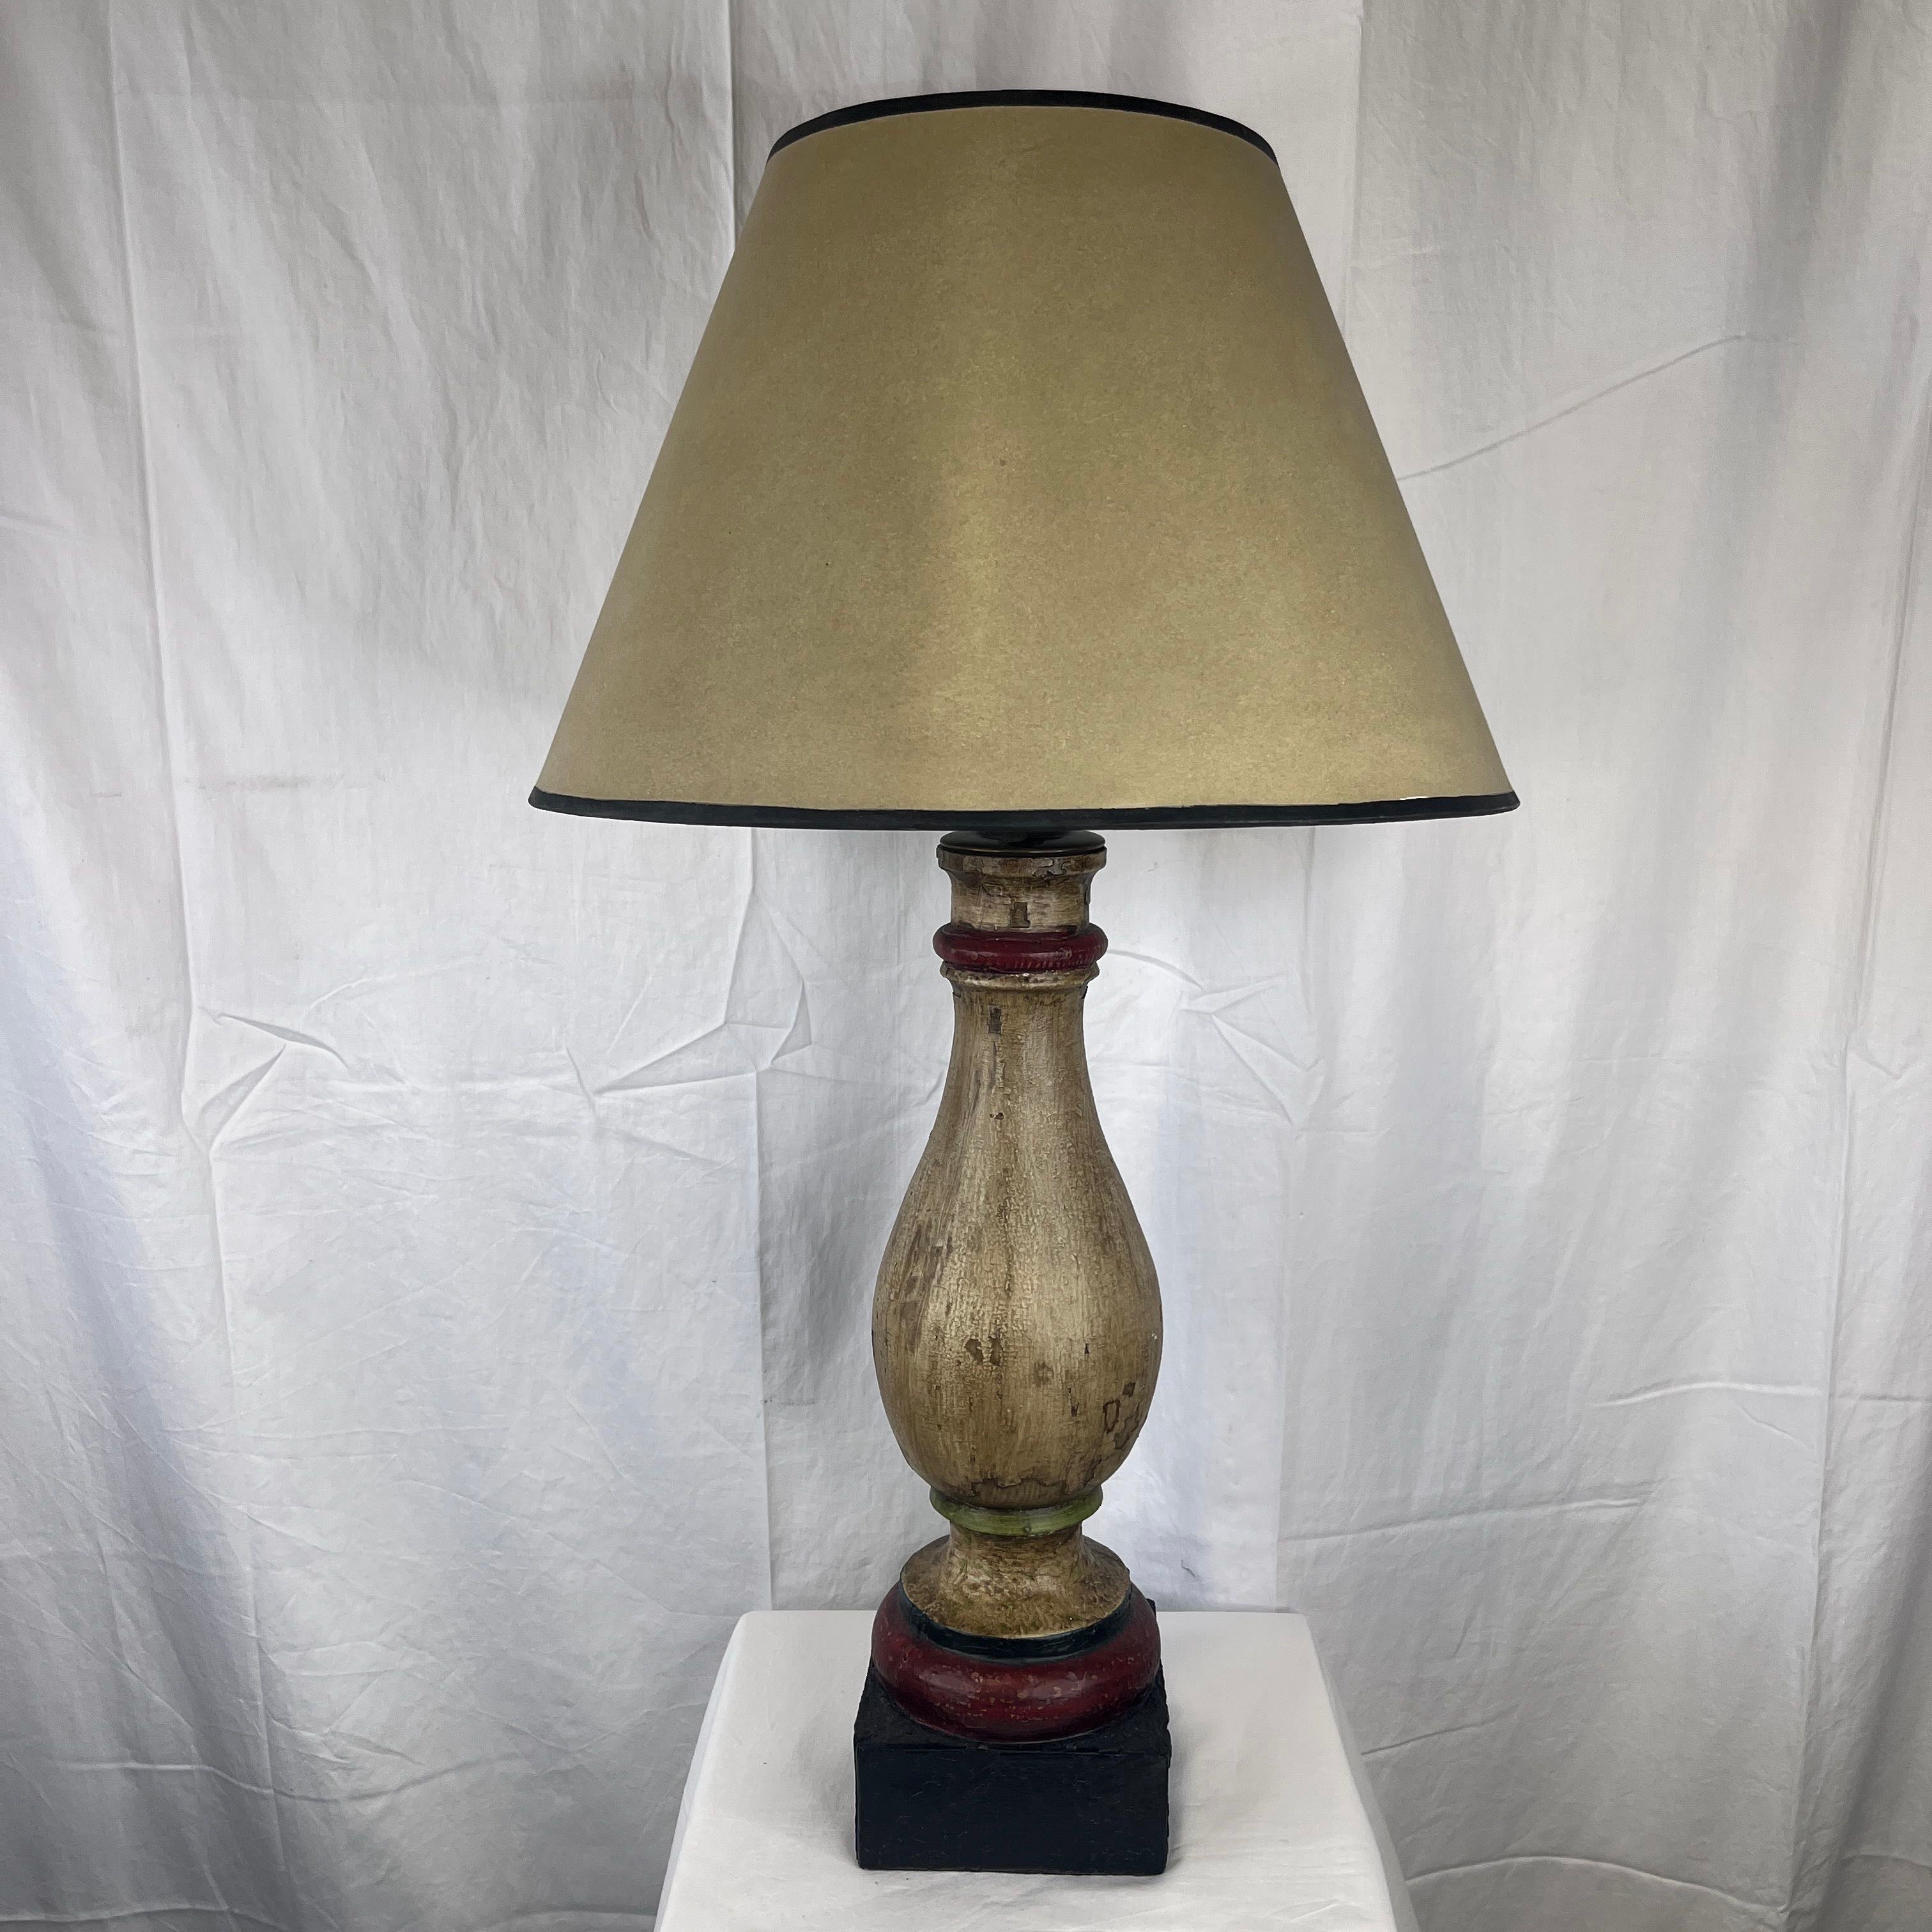 Wildwood Lamps Handmade Composite Hand Painted Old Balustre Table Lamp